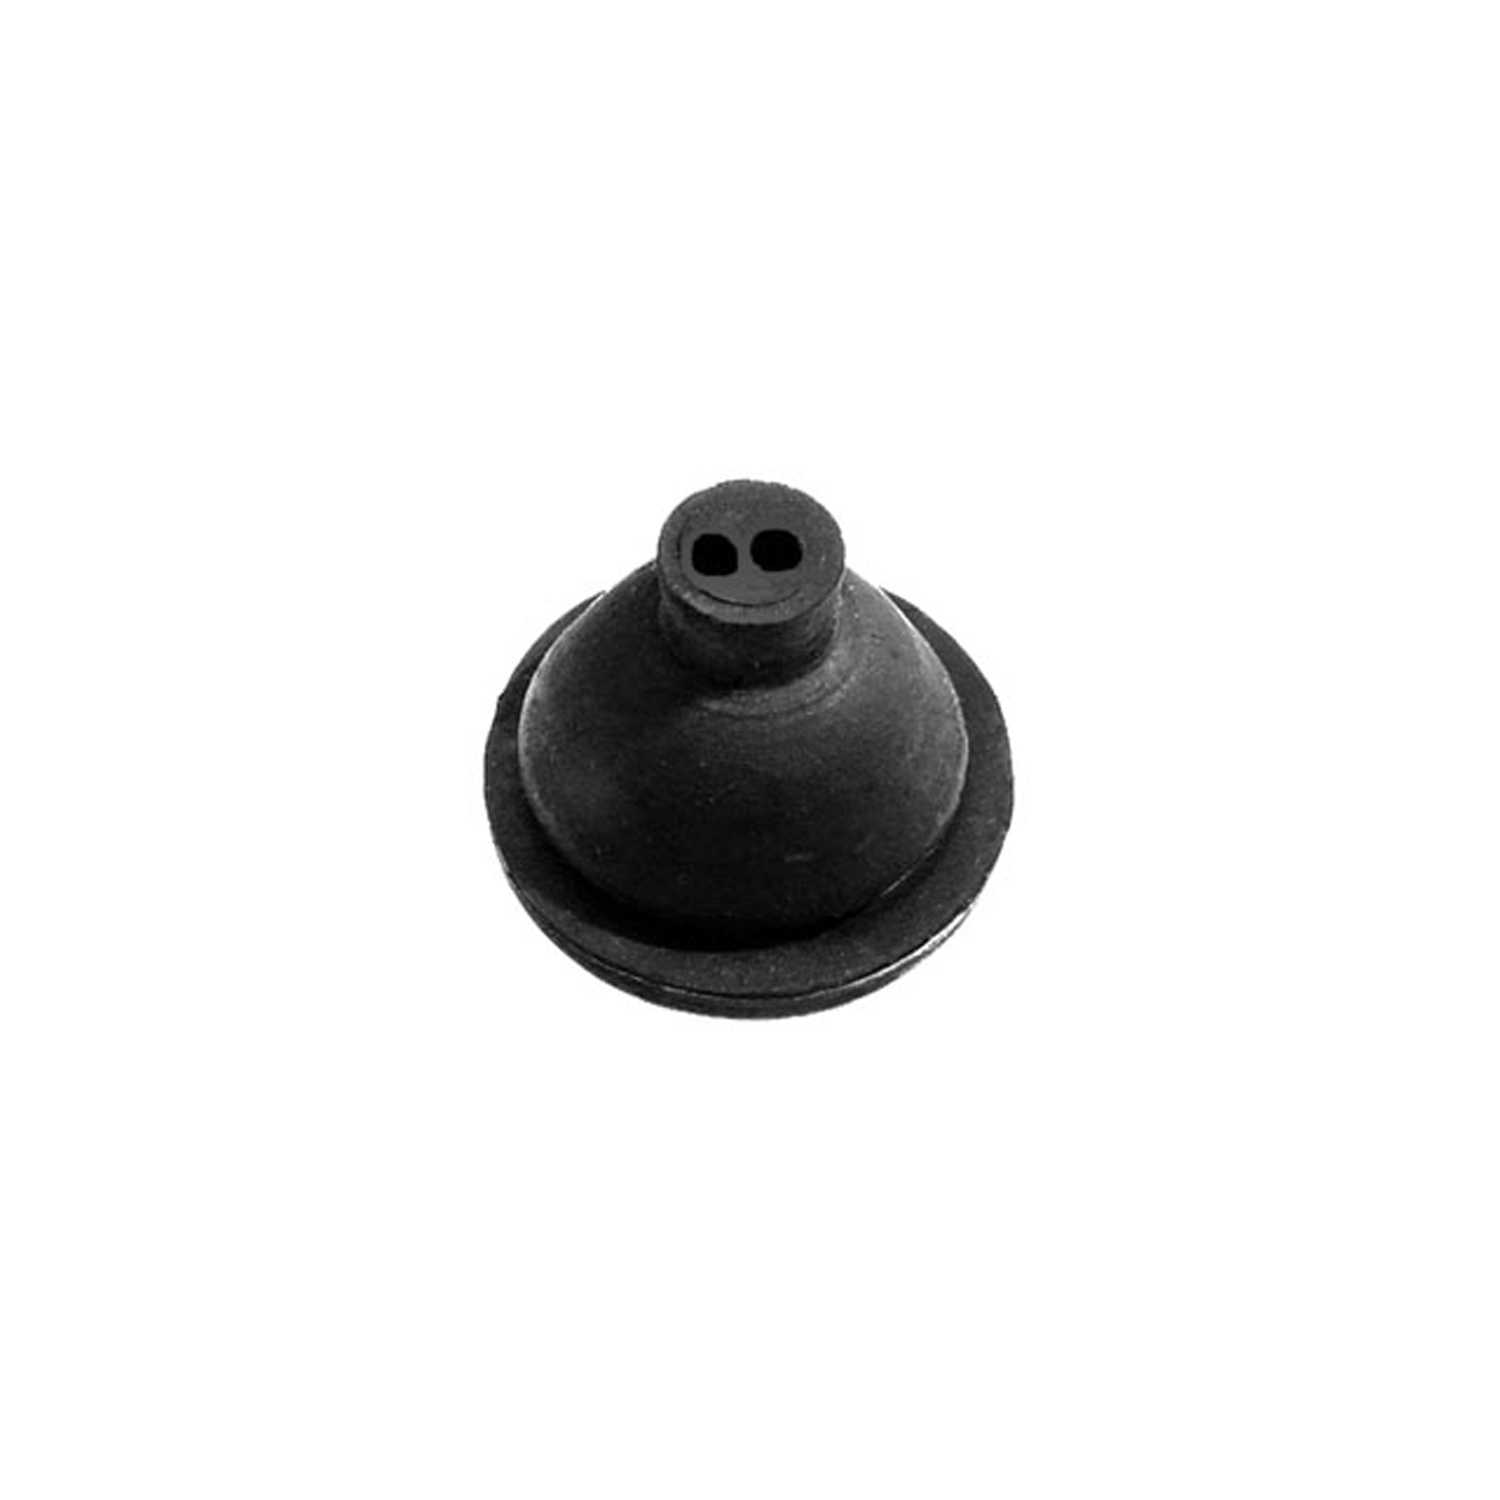 1970 Chevrolet G10 Van Dash  Firewall Grommet.  Double-hole type for two wires-RP 1-G